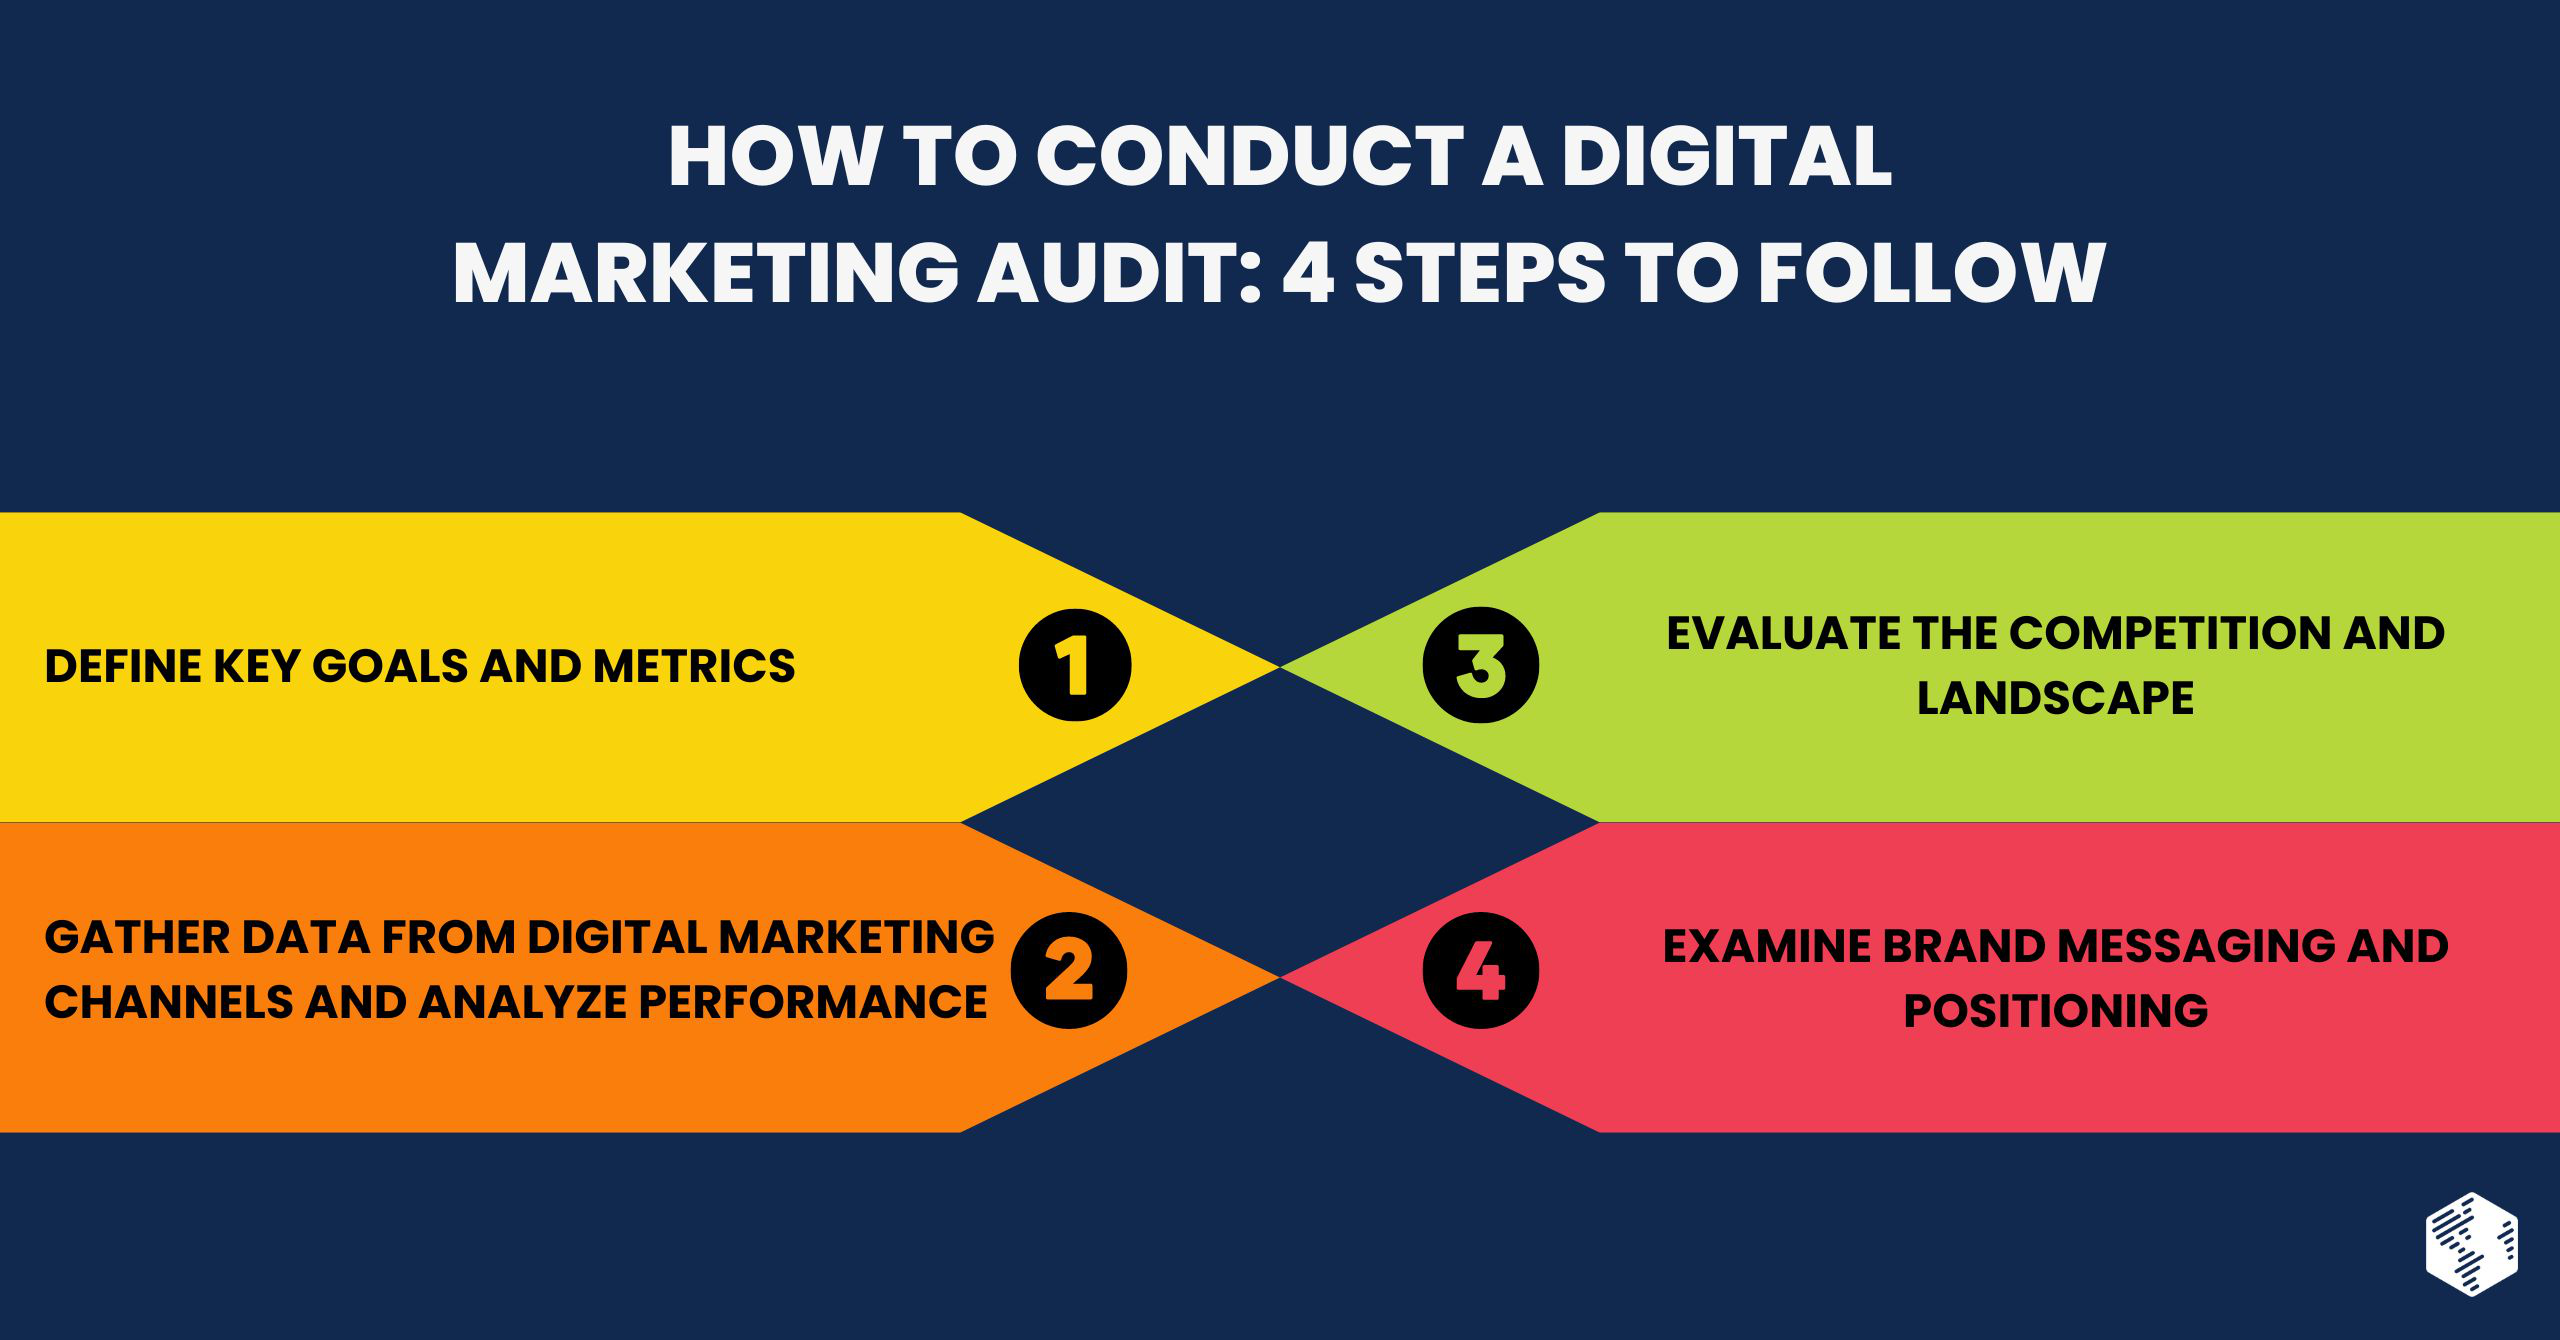 How to Conduct a Digital Marketing Audit